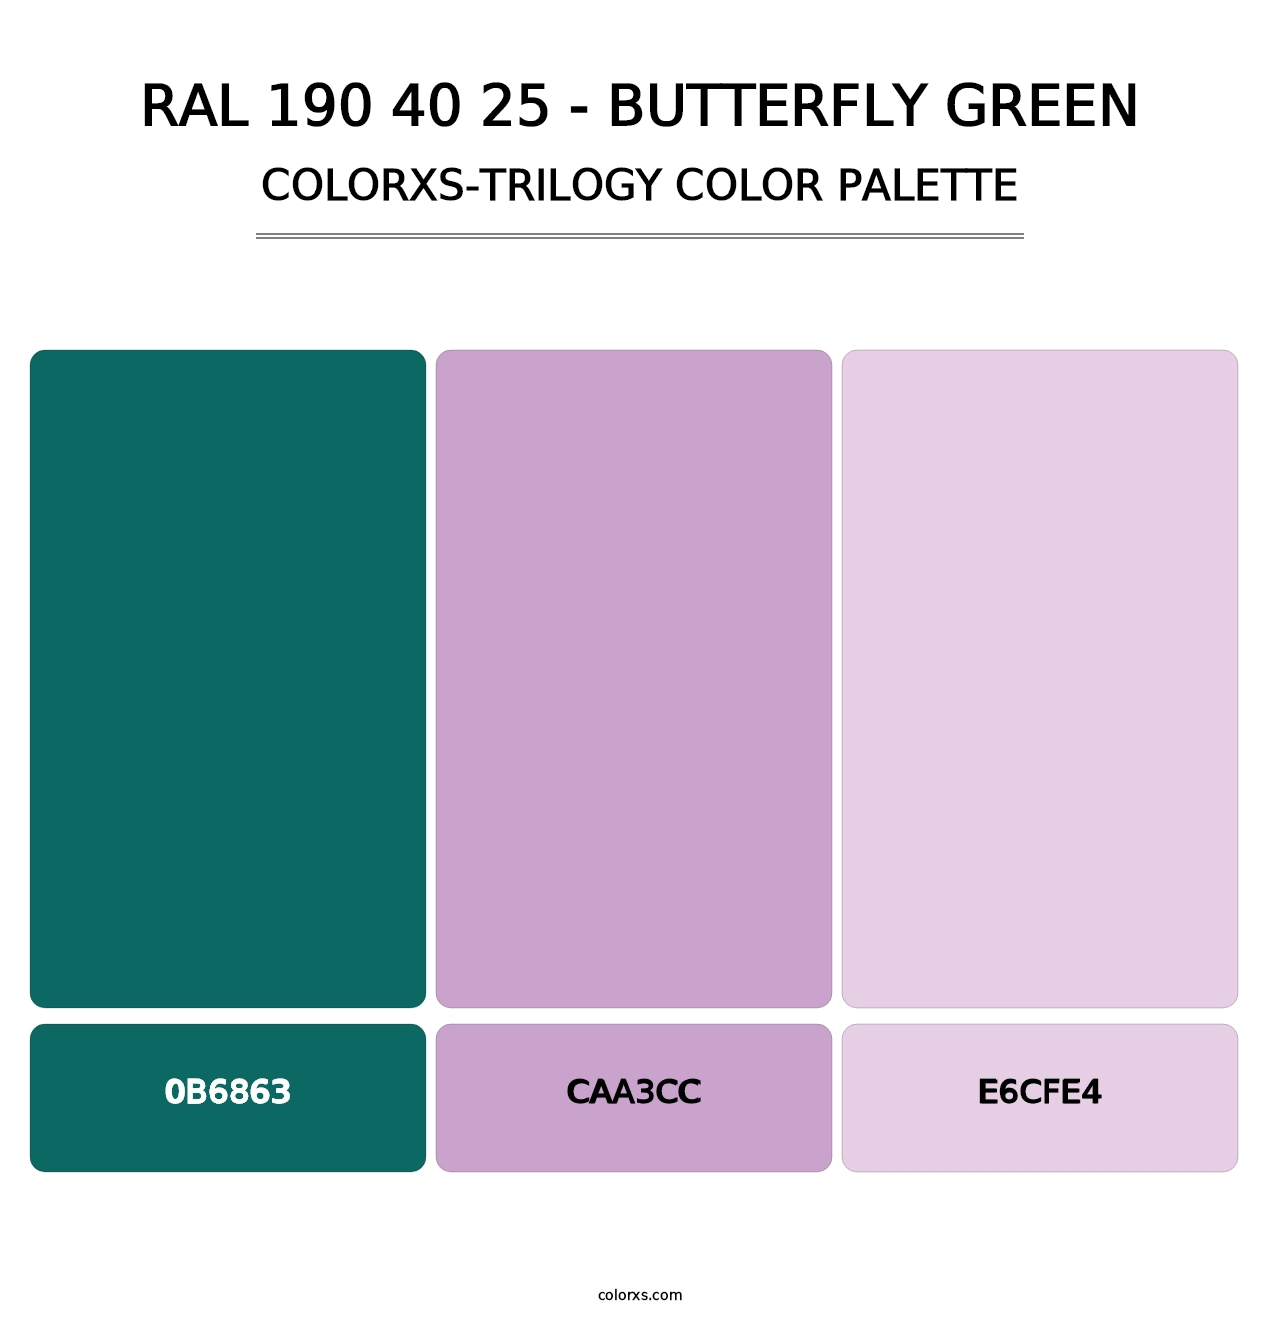 RAL 190 40 25 - Butterfly Green - Colorxs Trilogy Palette